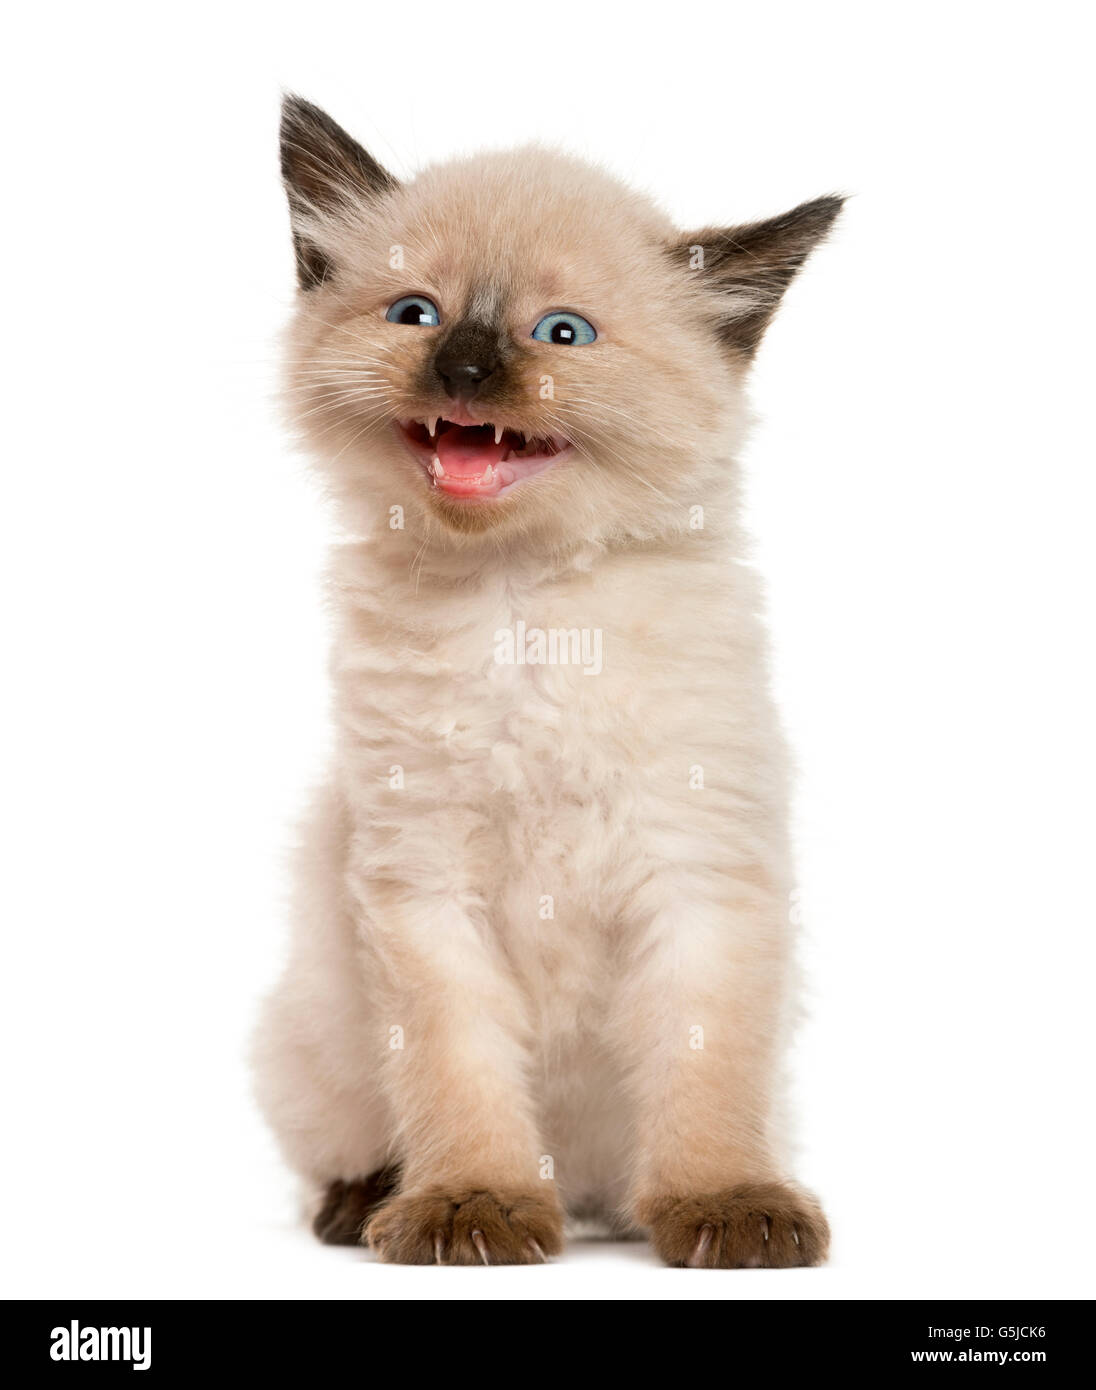 Kitten meowing in front of white background Banque D'Images